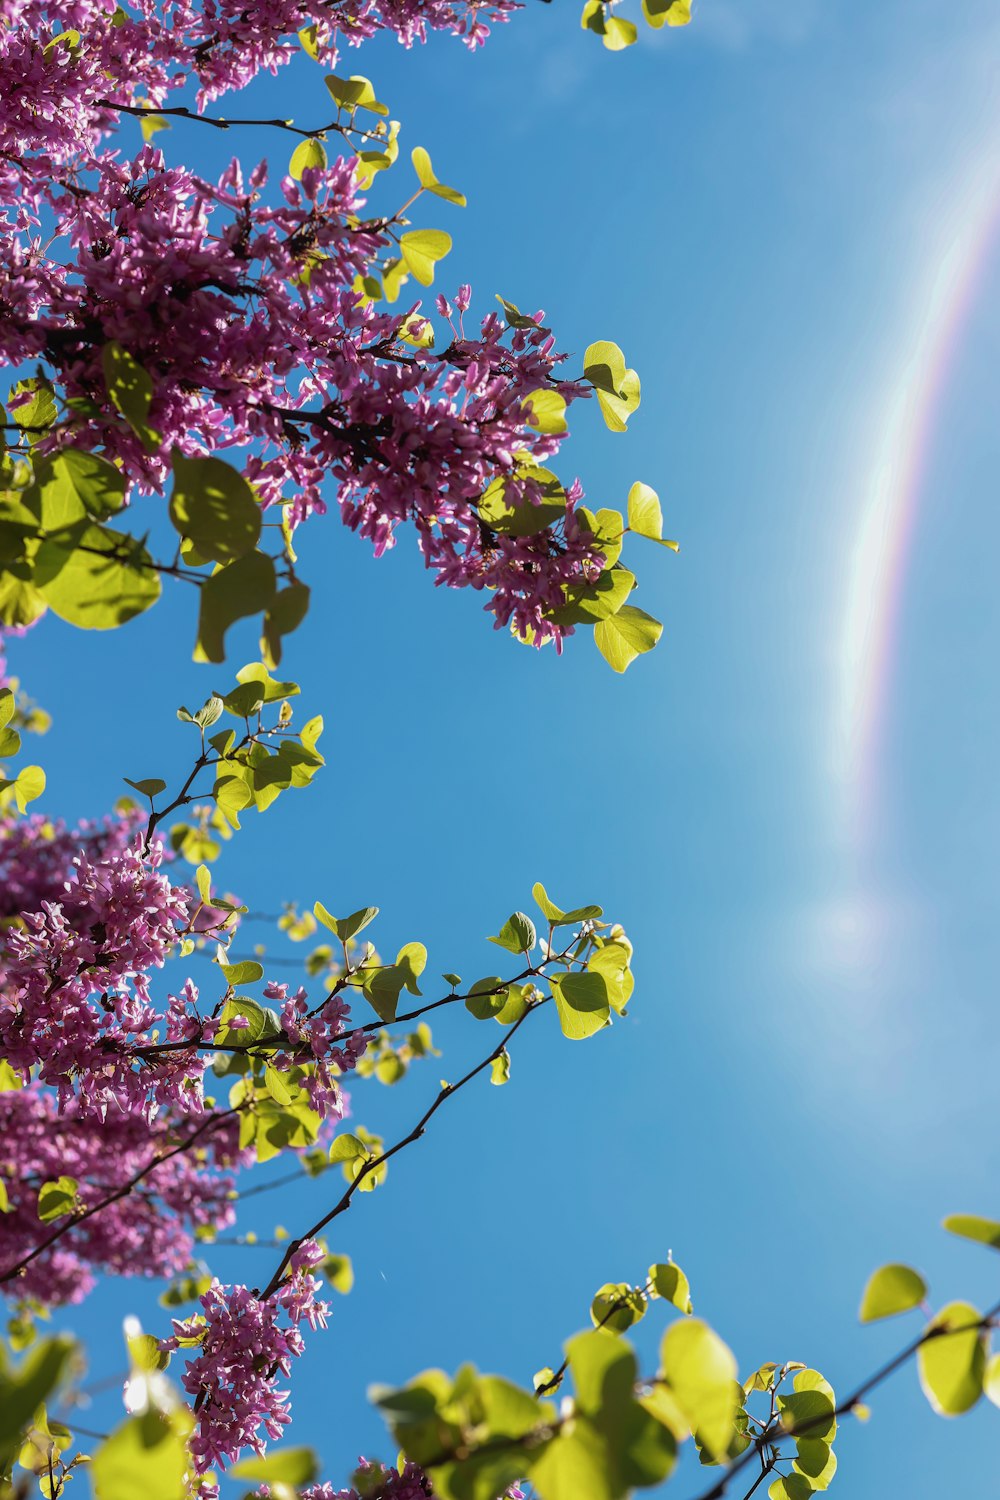 a rainbow in the sky over a tree with purple flowers